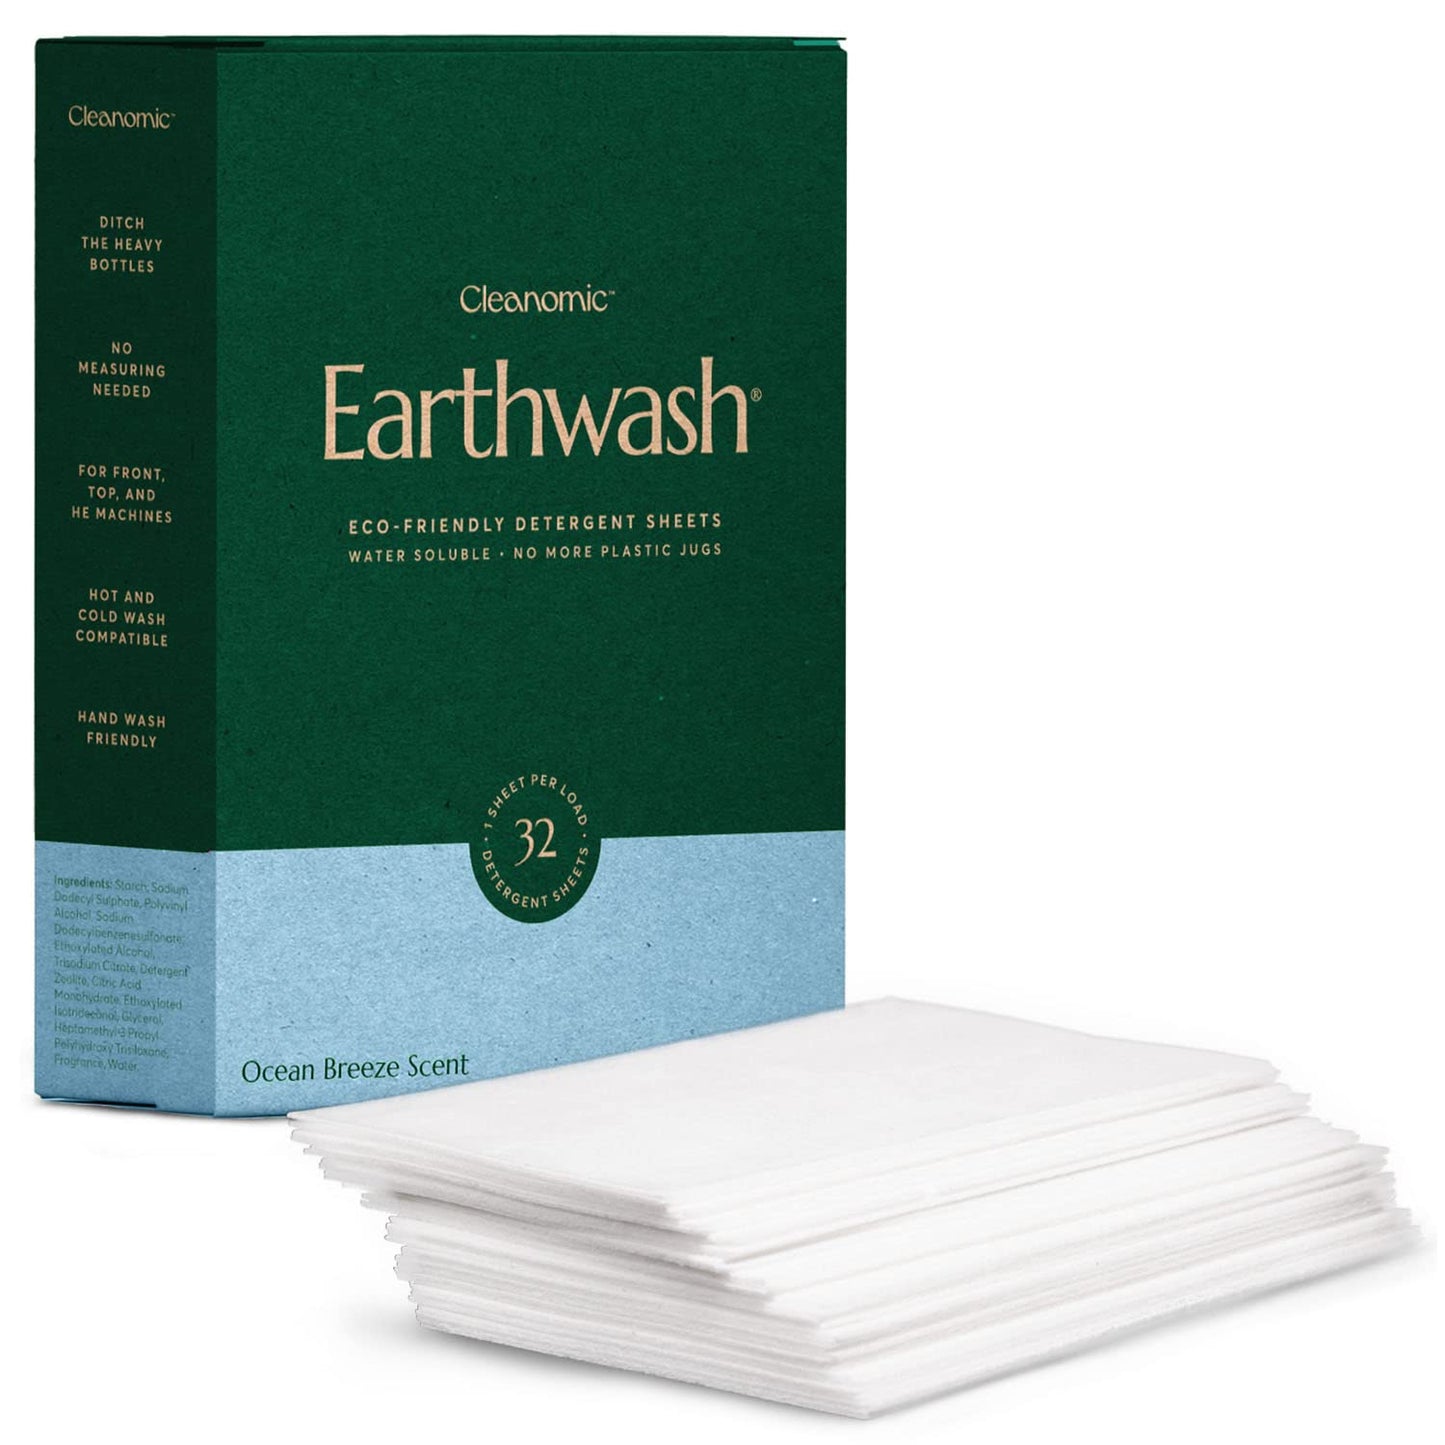 EarthWast: Laundry Detergent Sheets (32 Sheets Up To 64 Loads)